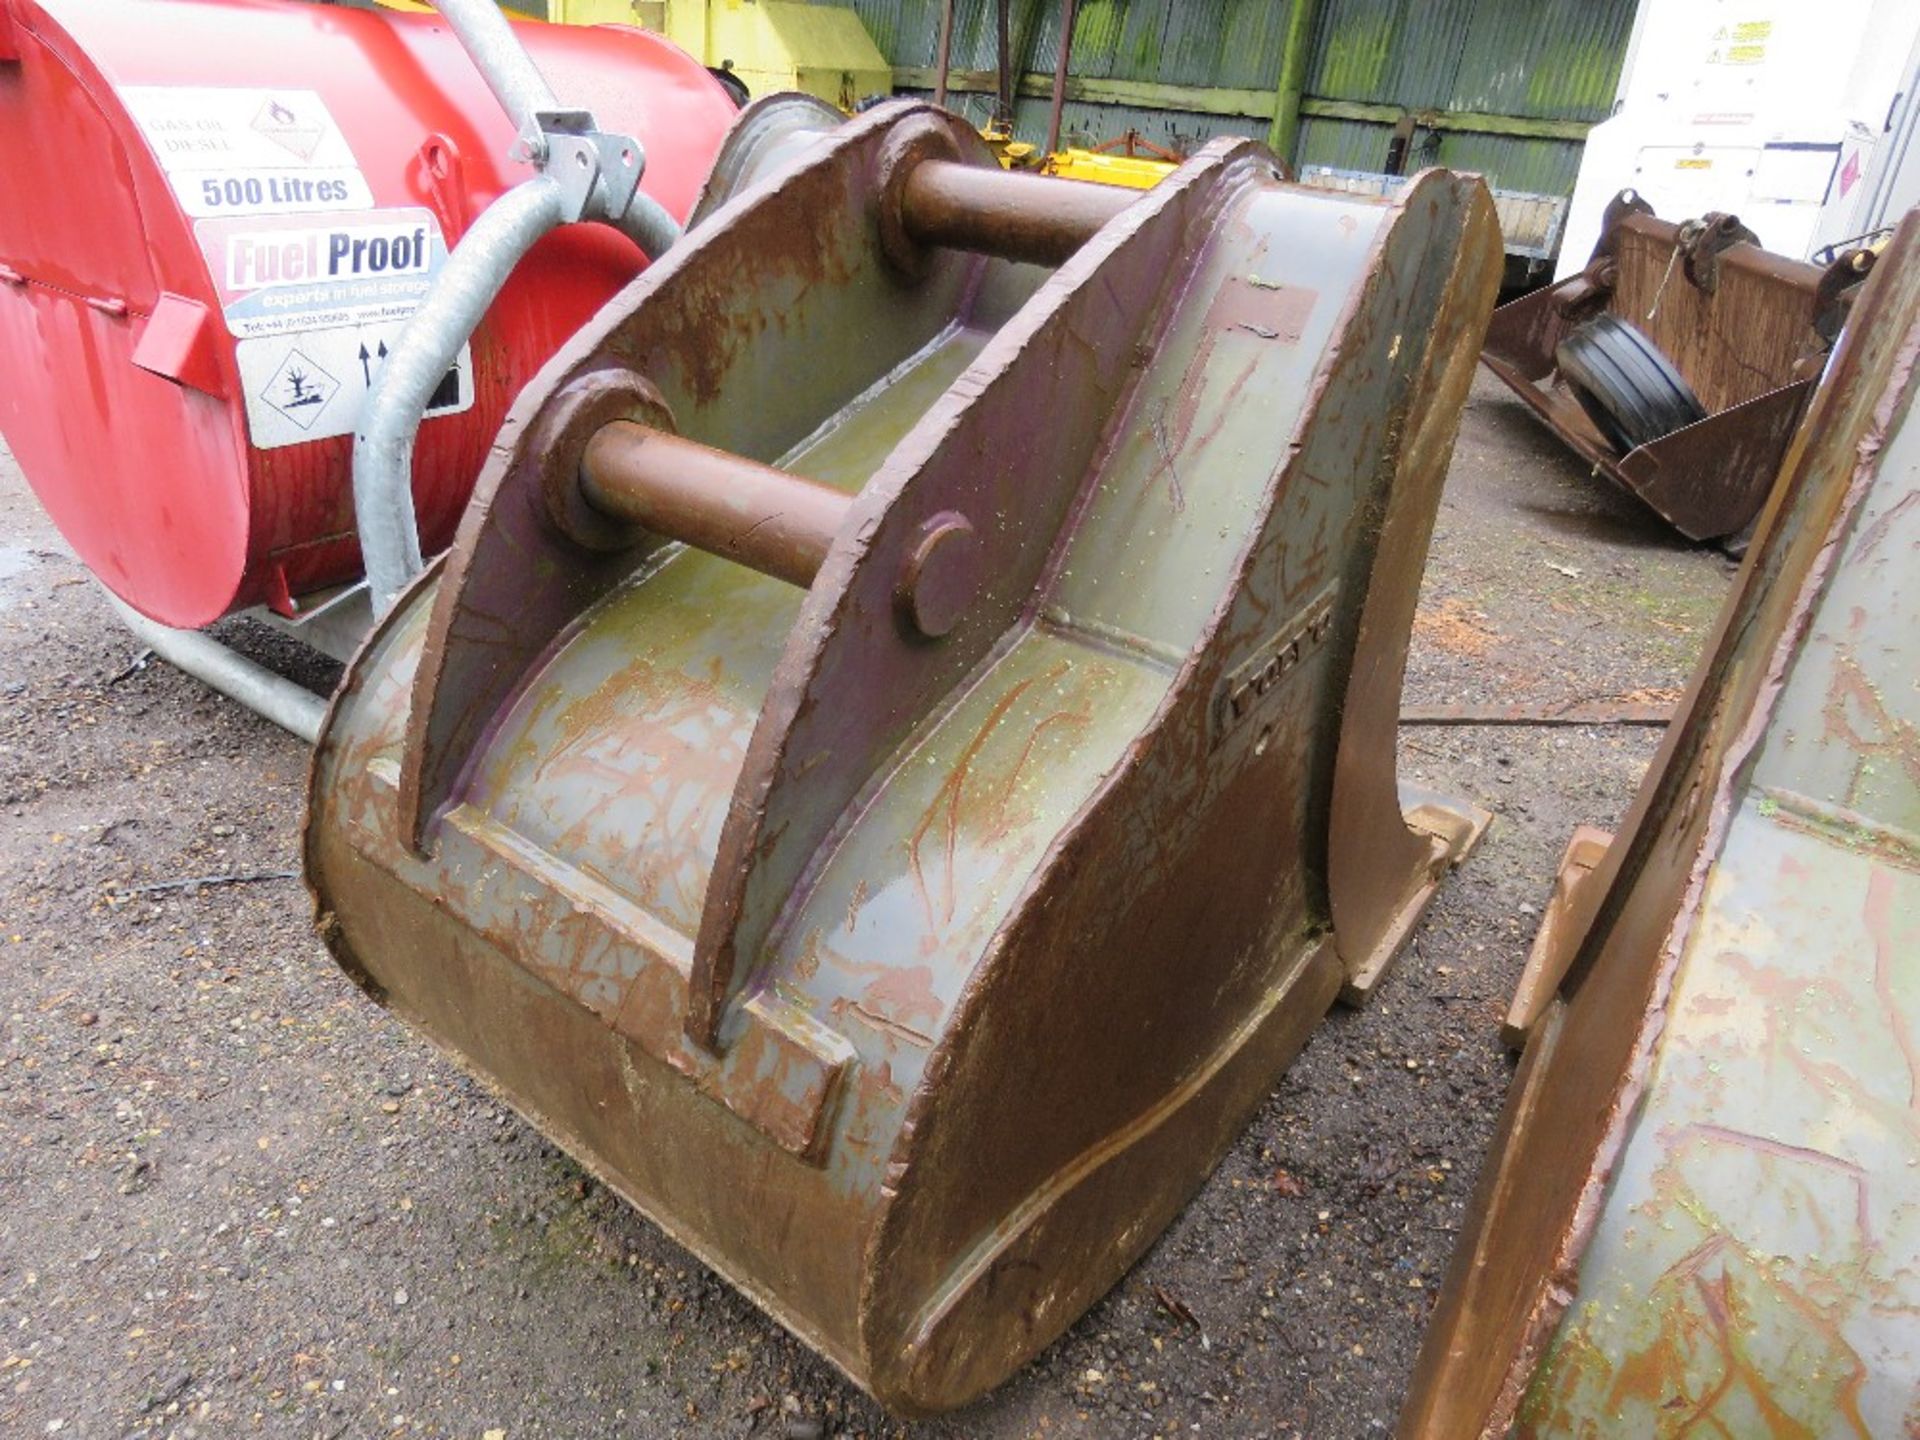 GENUINE VOLVO EXCAVATOR BUCKET SUITABLE FOR 35TONNE EXCAVATOR ON 90MM PINS. 0.9M WIDTH APPROX. APPEA - Image 4 of 4